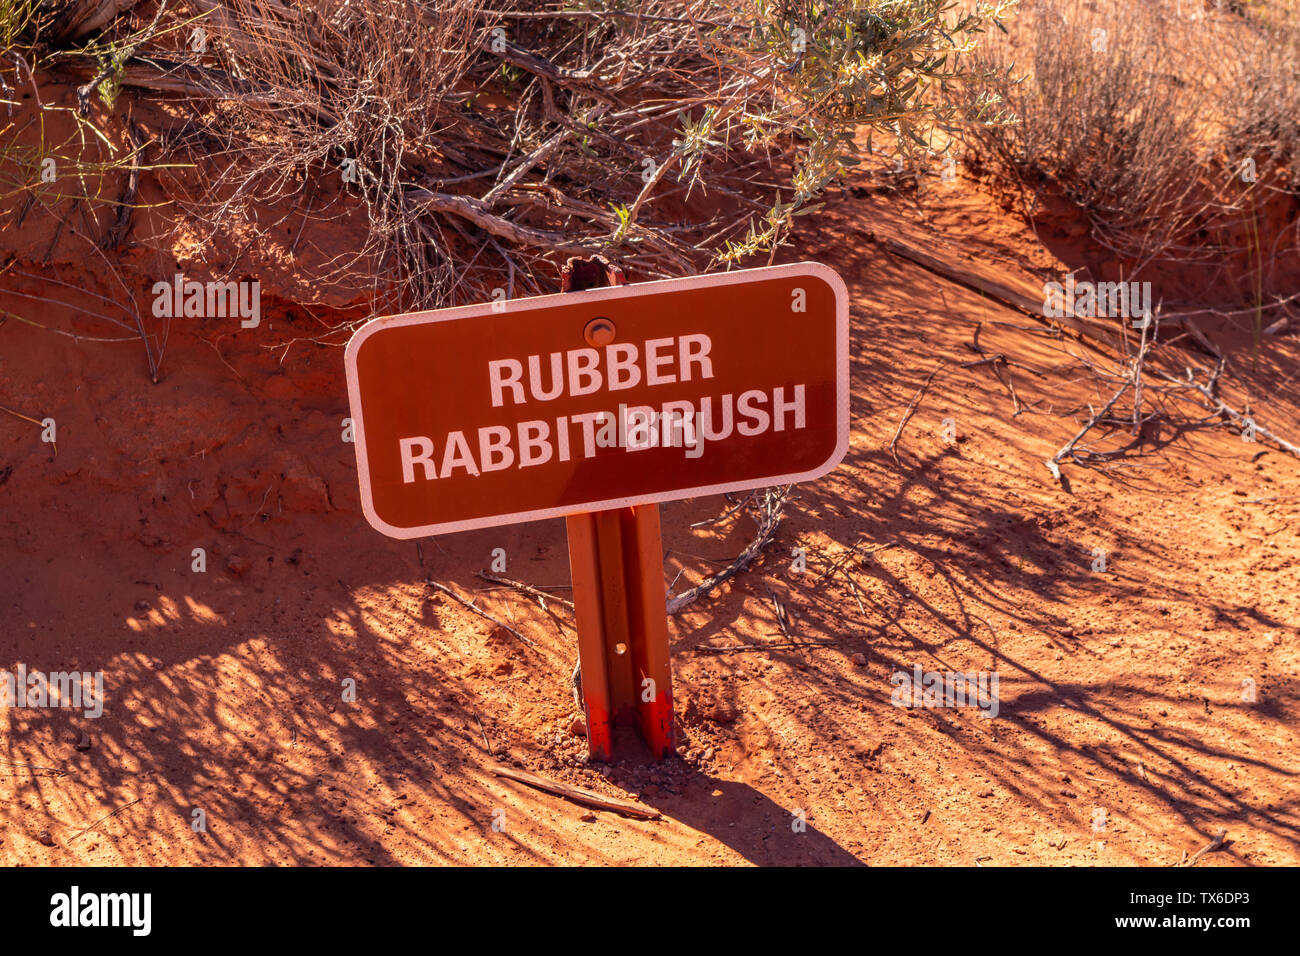 Desert rubber rabbit brush. Plant and sign against blur red sand background. Trail path signage Monument Valley Navajo Tribal Park, USA Stock Photo